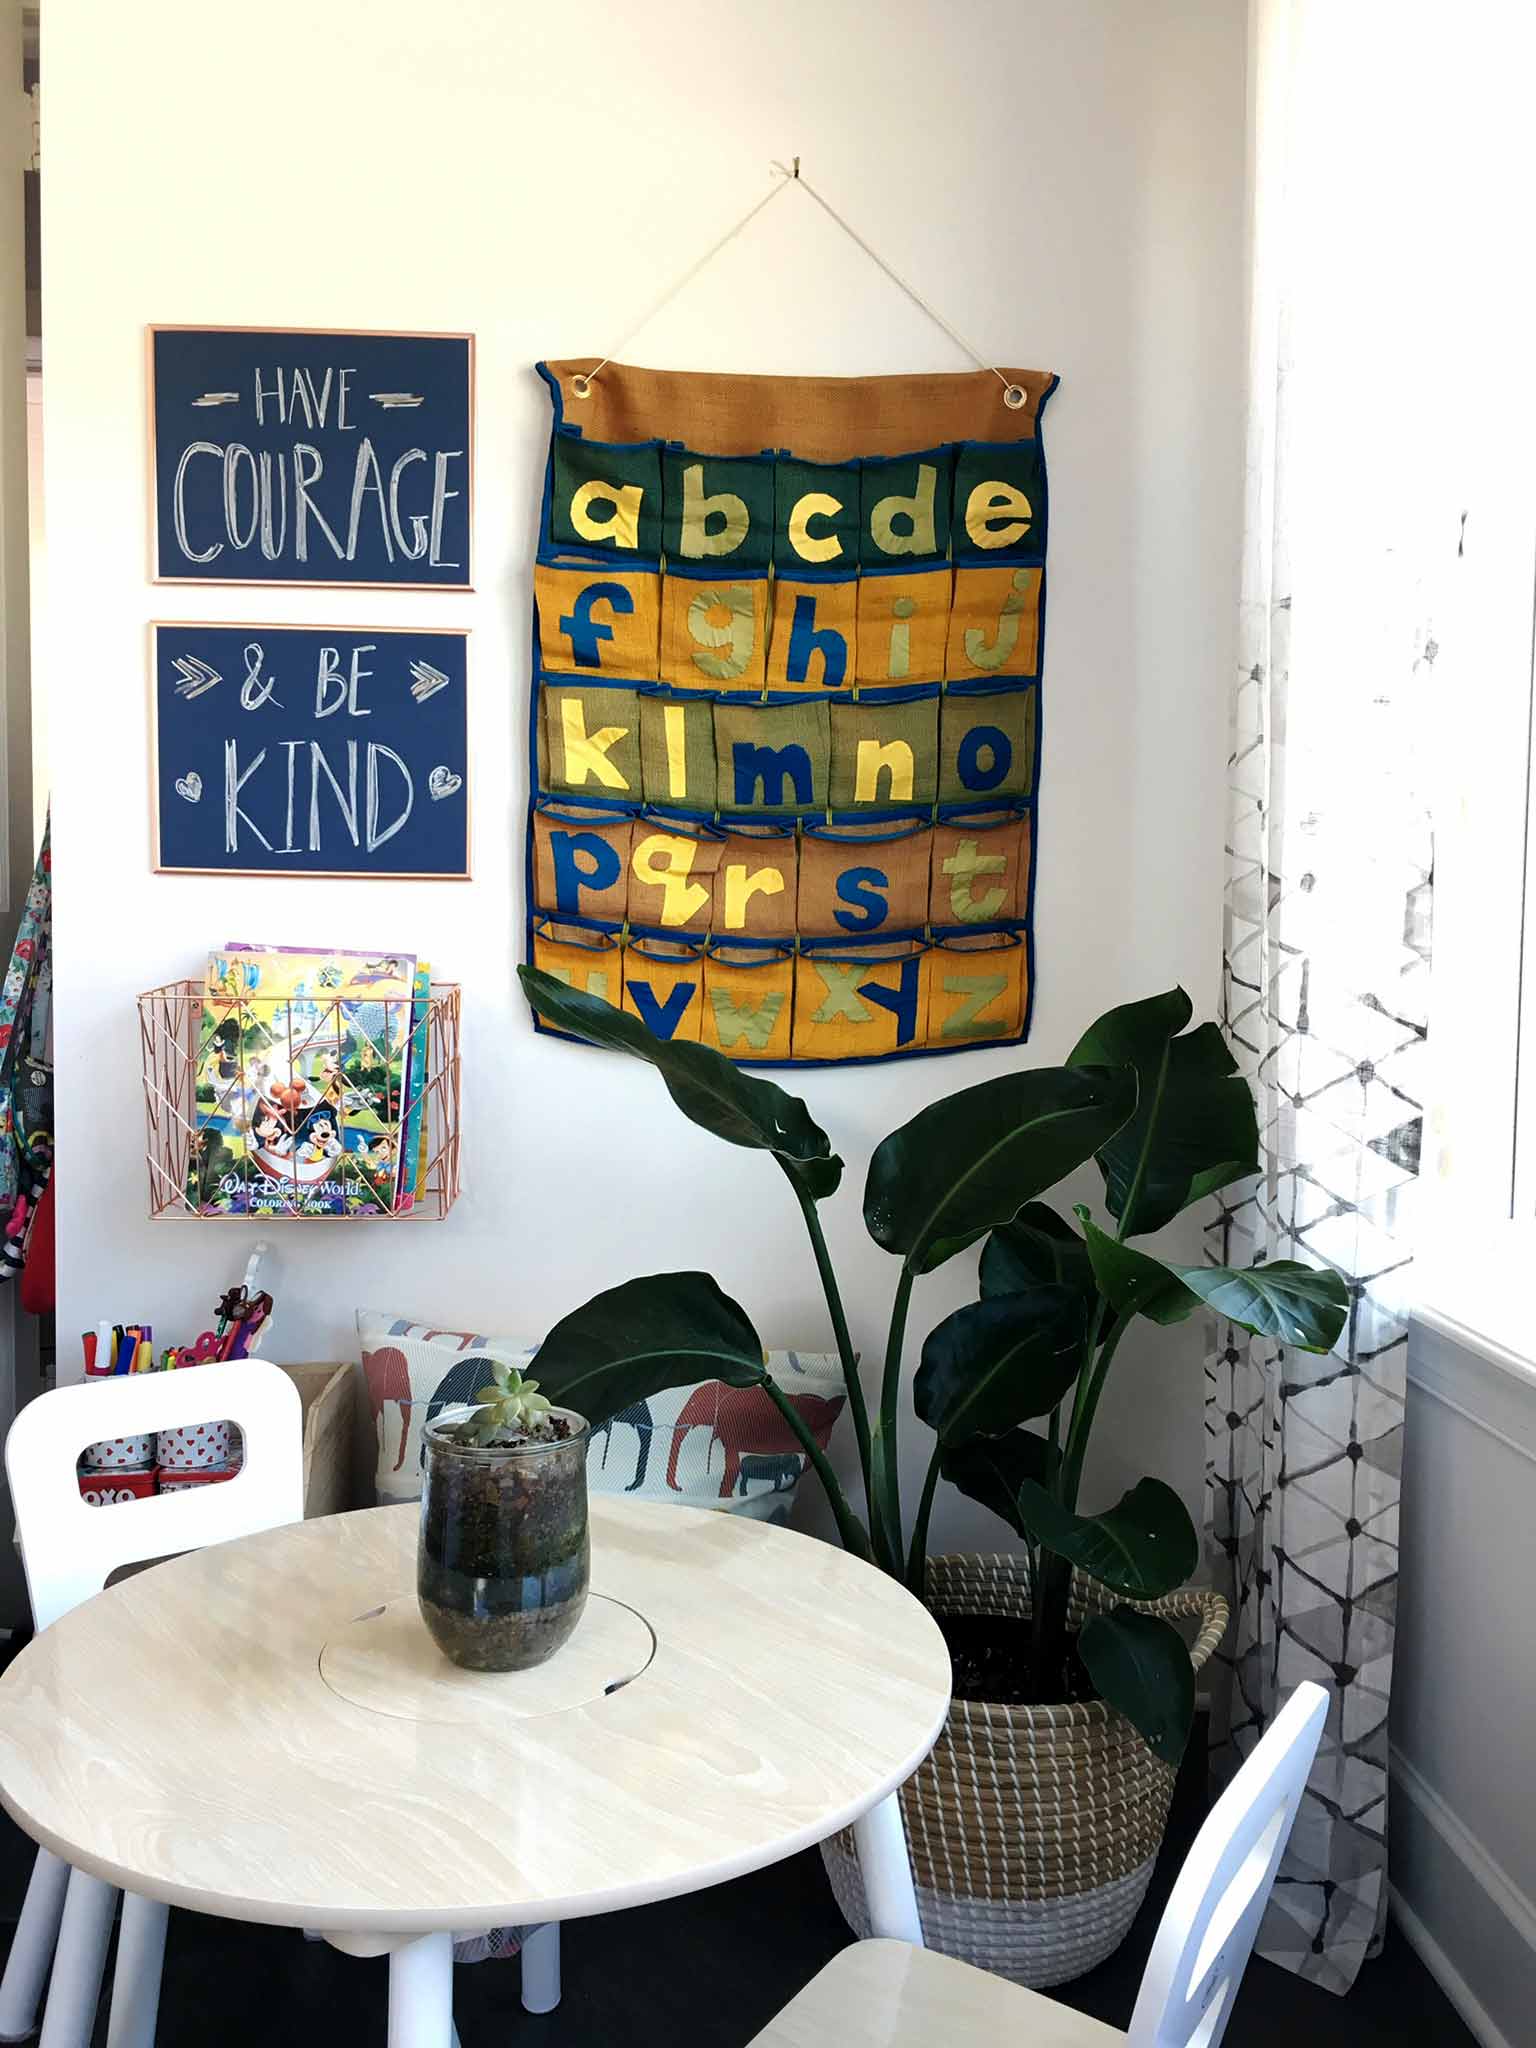 Kids art and craft table - playroom house tour - That Homebird Life Blog